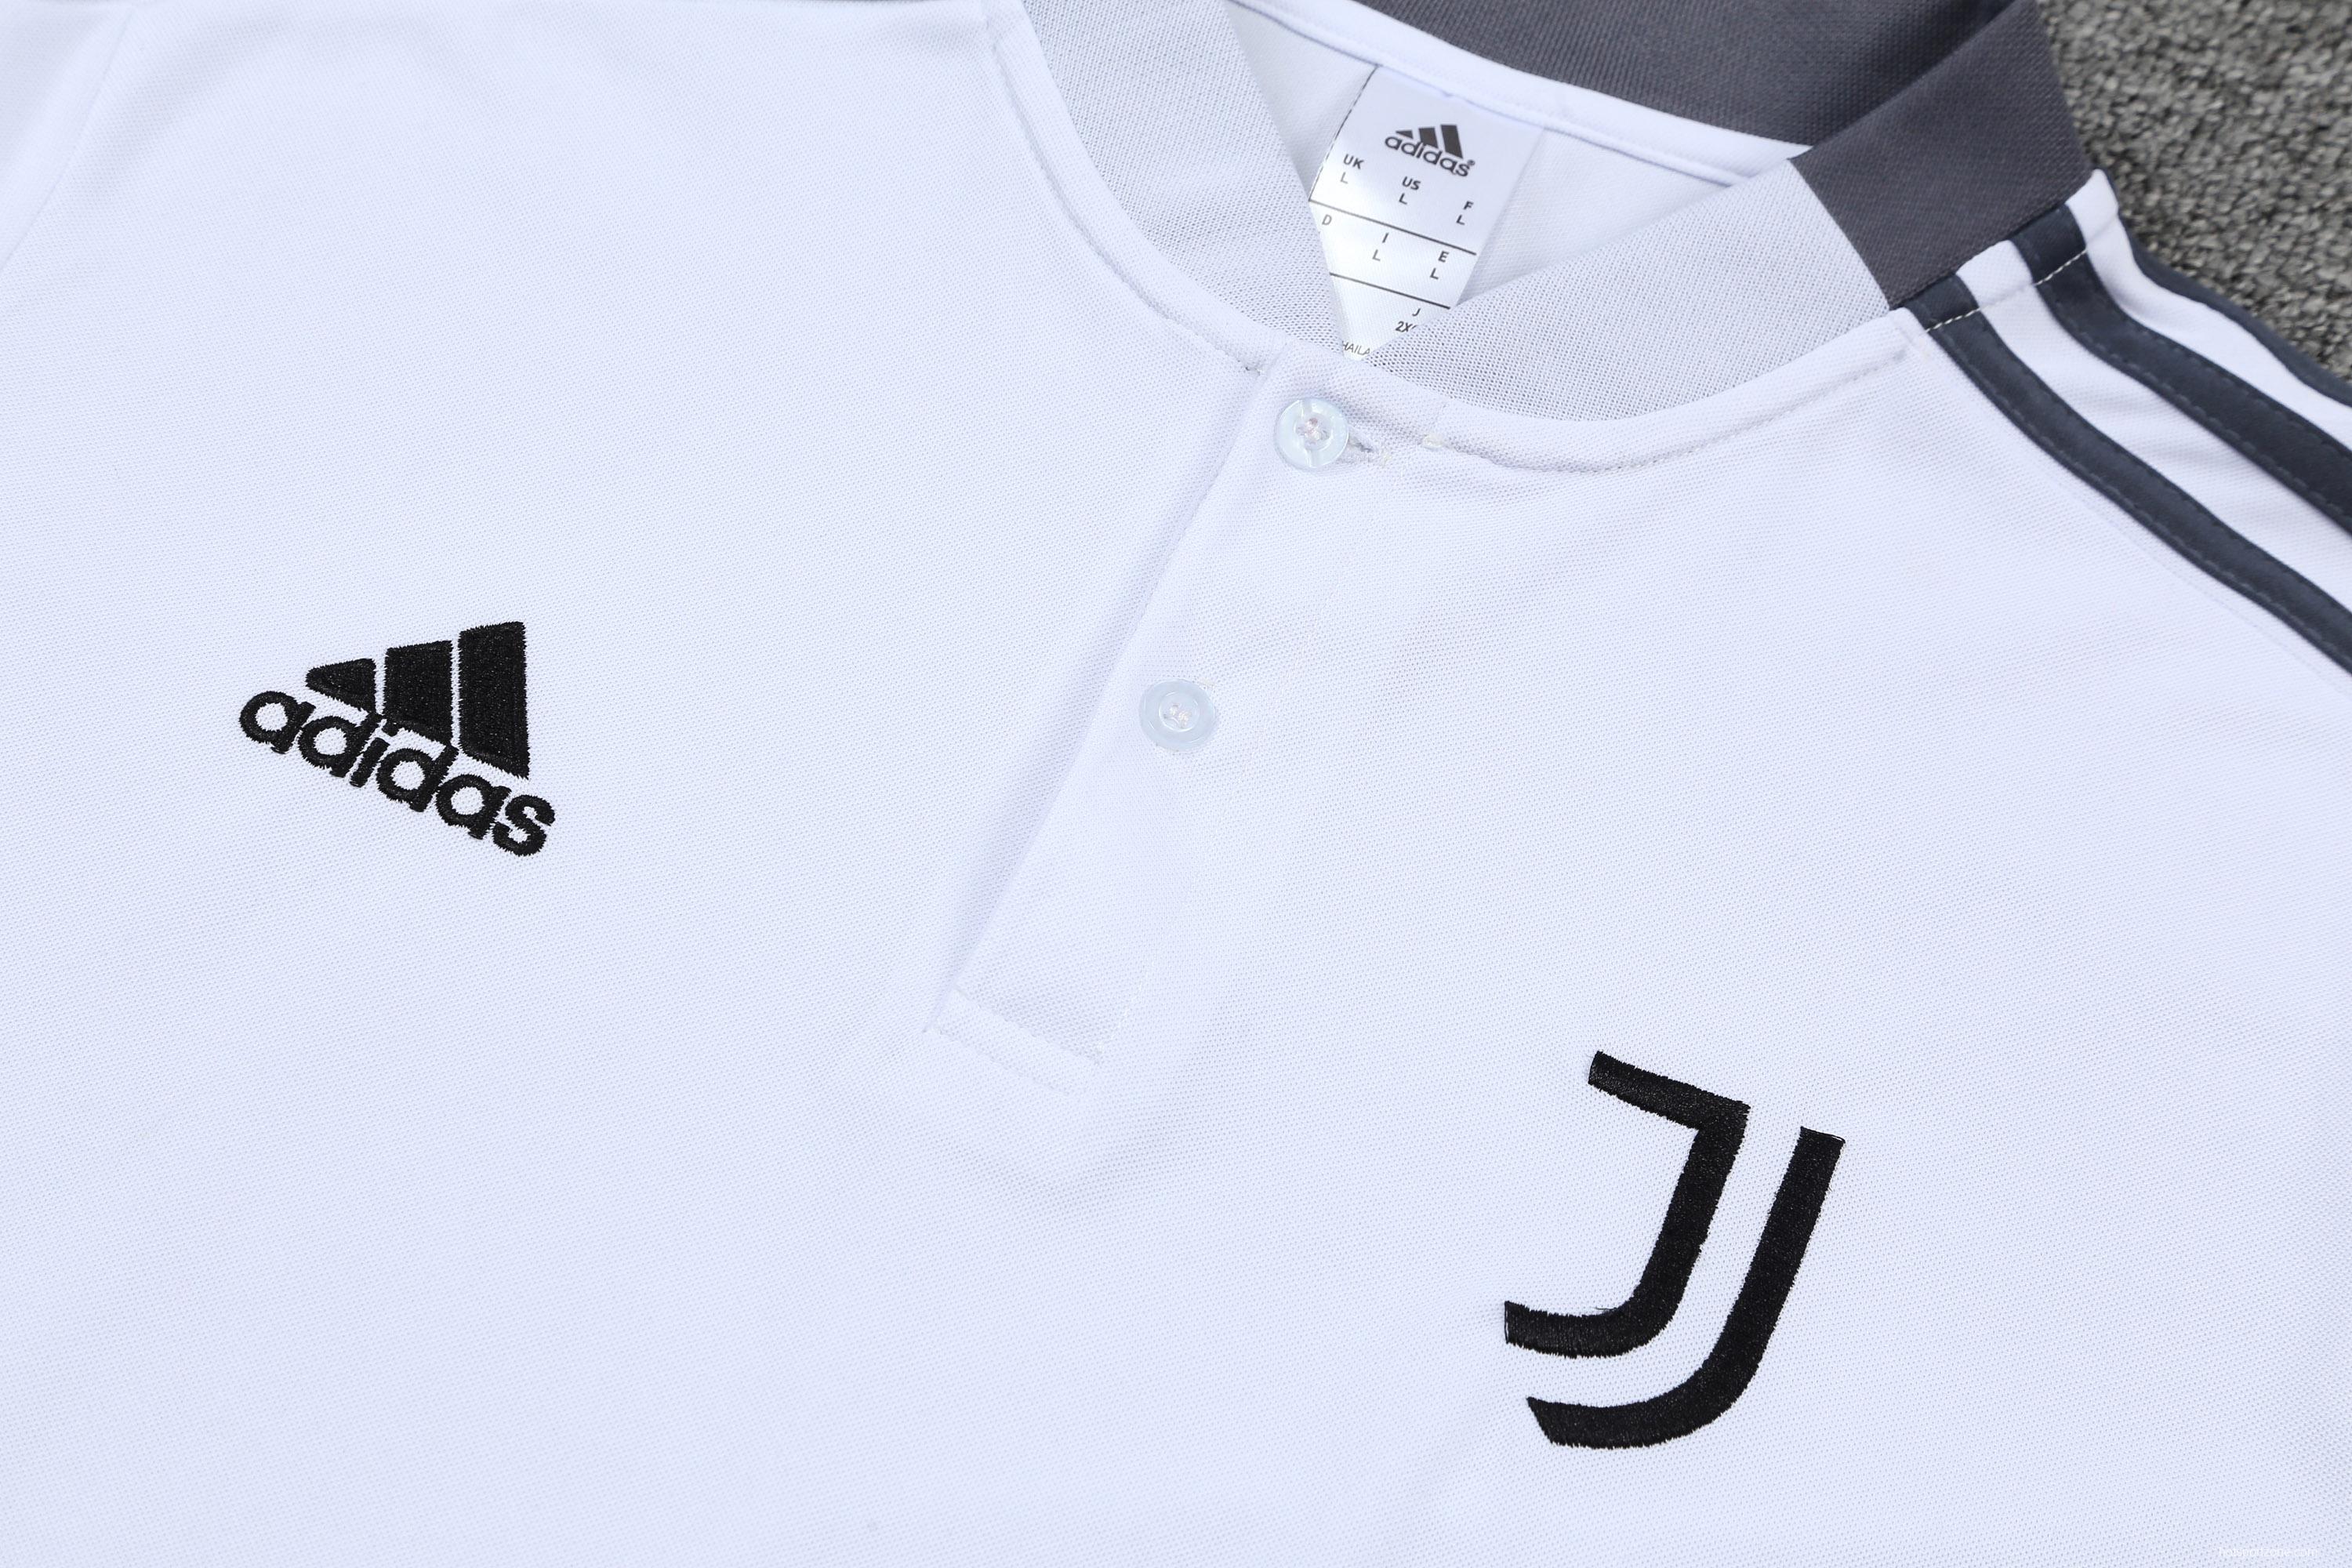 Juventus POLO kit White(not supported to be sold separately)